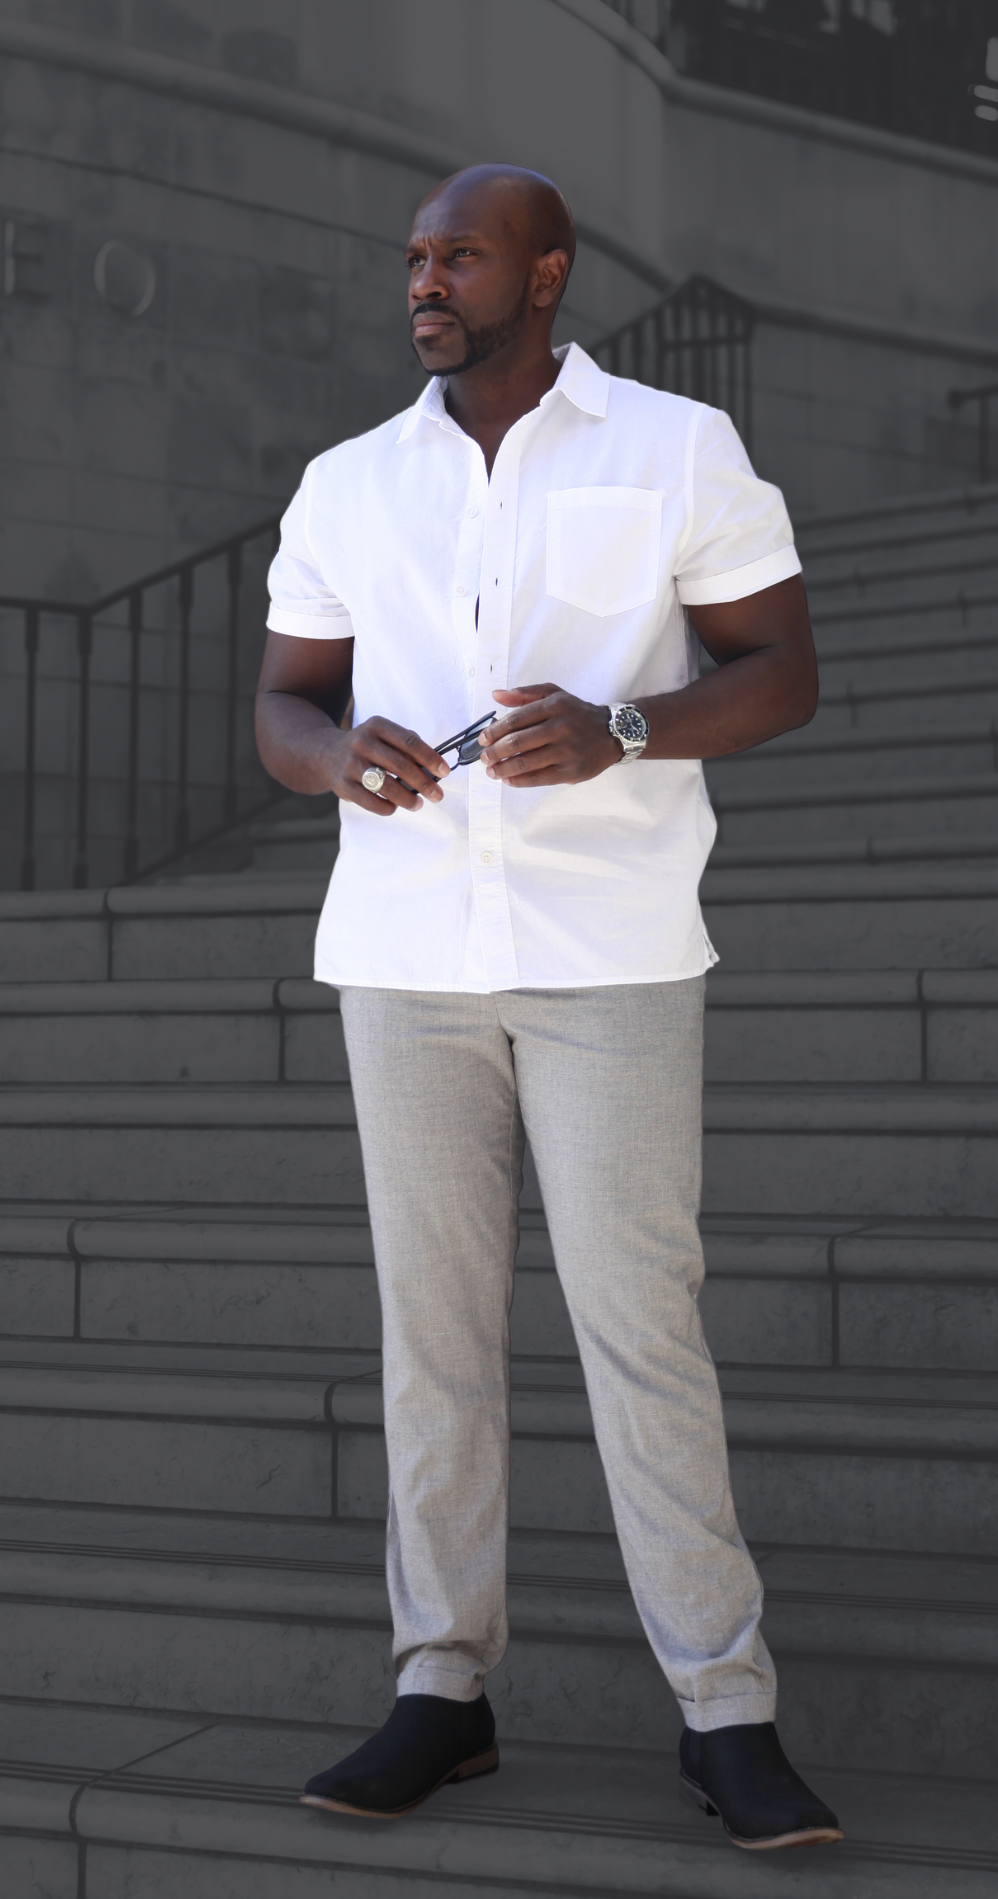 A man in a white shirt and grey pants is standing on a set of stairs.